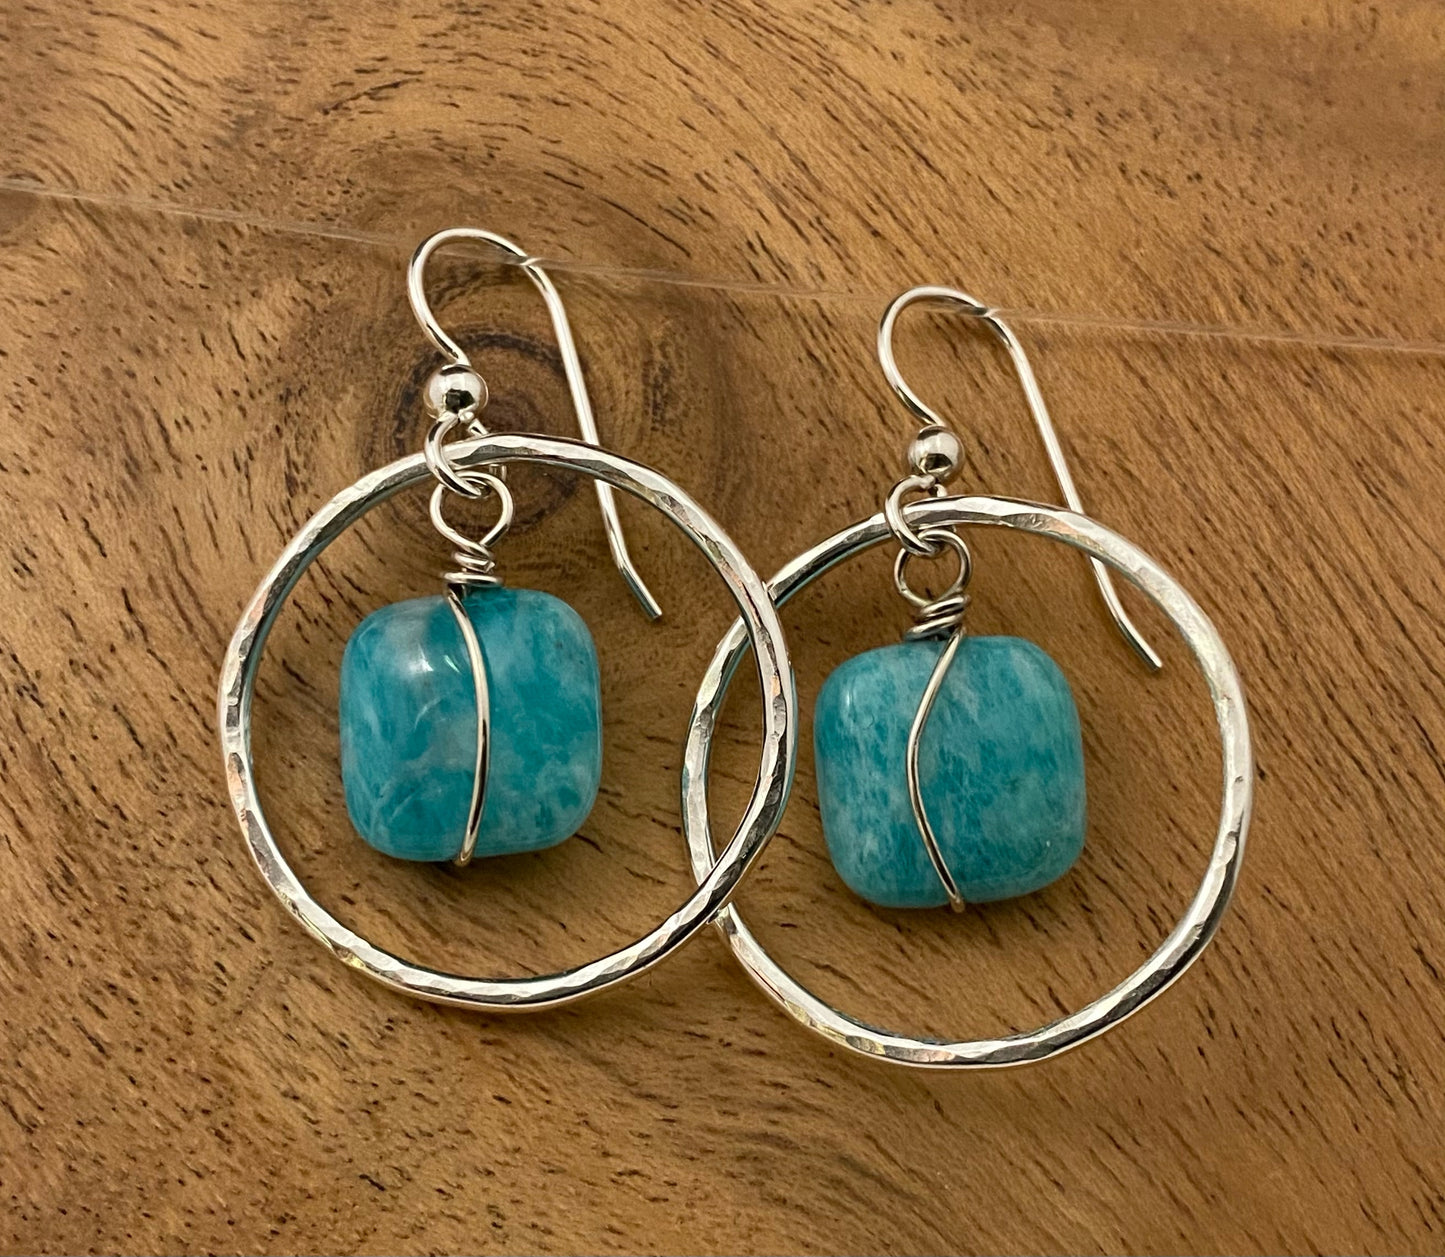 Forged sterling hoops with amazonite gemstone